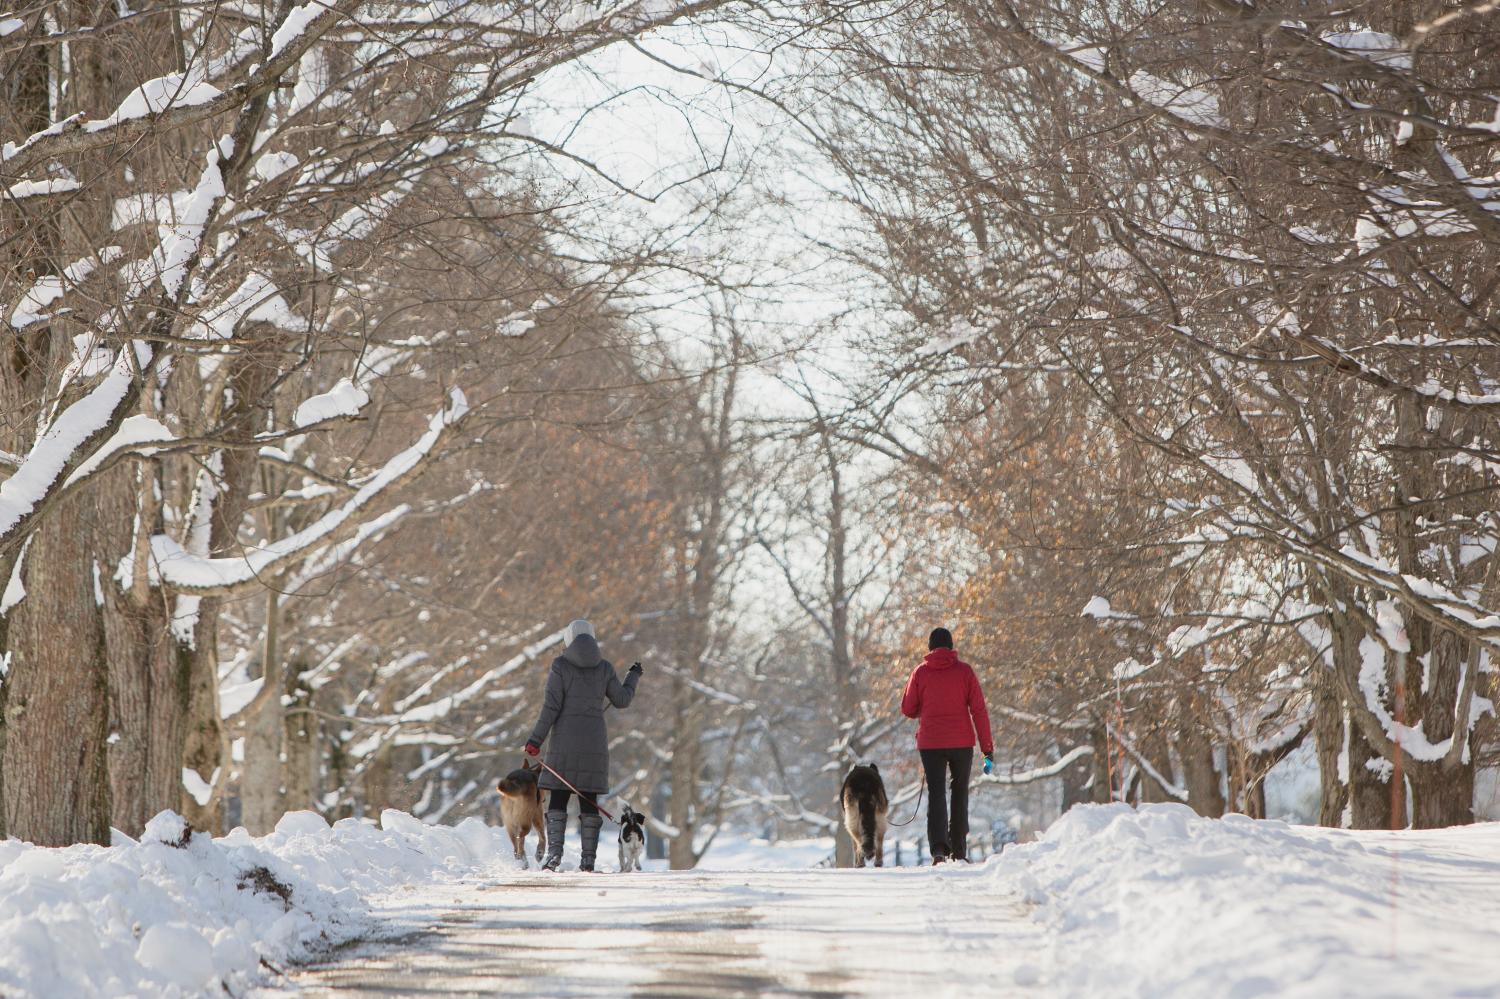 Women with dogs walk through the snow after the first lake-effect snowfall of the season at Knox Farm State Park in the Buffalo suburb of East Aurora, New York, U.S. December 8, 2017. REUTERS/Lindsay Dedario